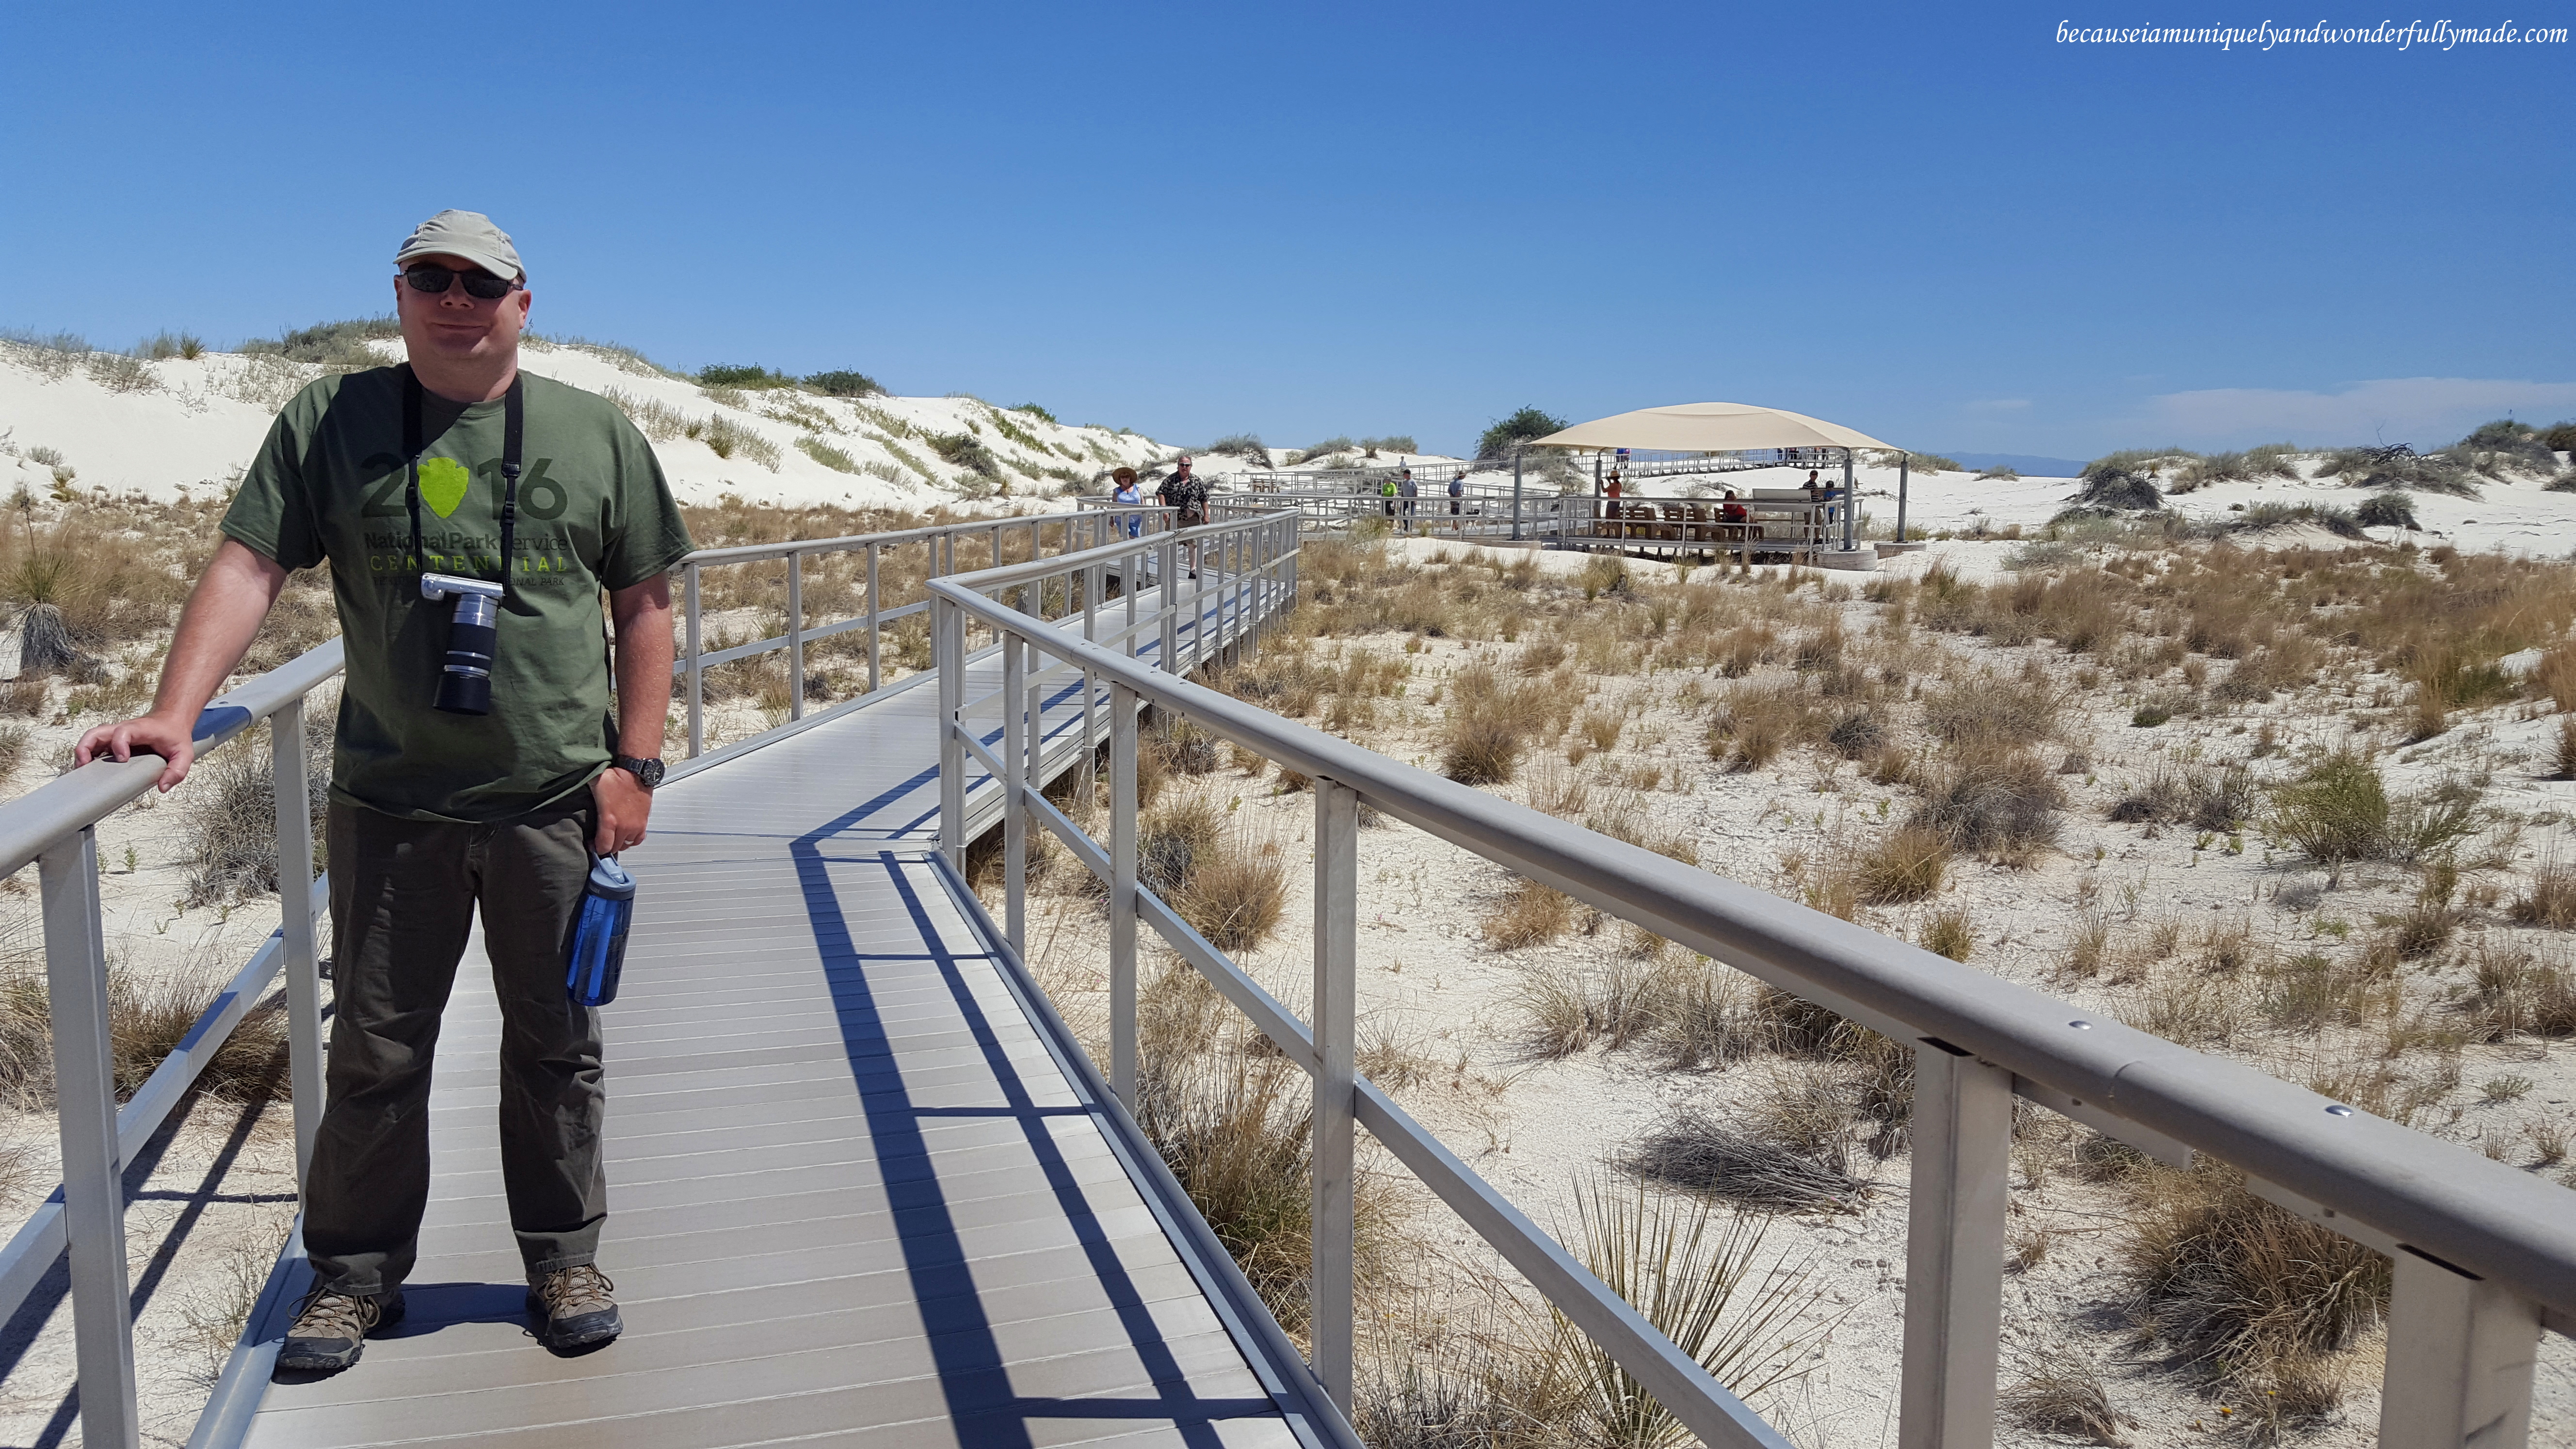 The Interdune Boardwalk is a half mile round trip trail located just along the Dunes Drive. It is a self-guided walk with 10 outdoor exhibits along the boardwalk.